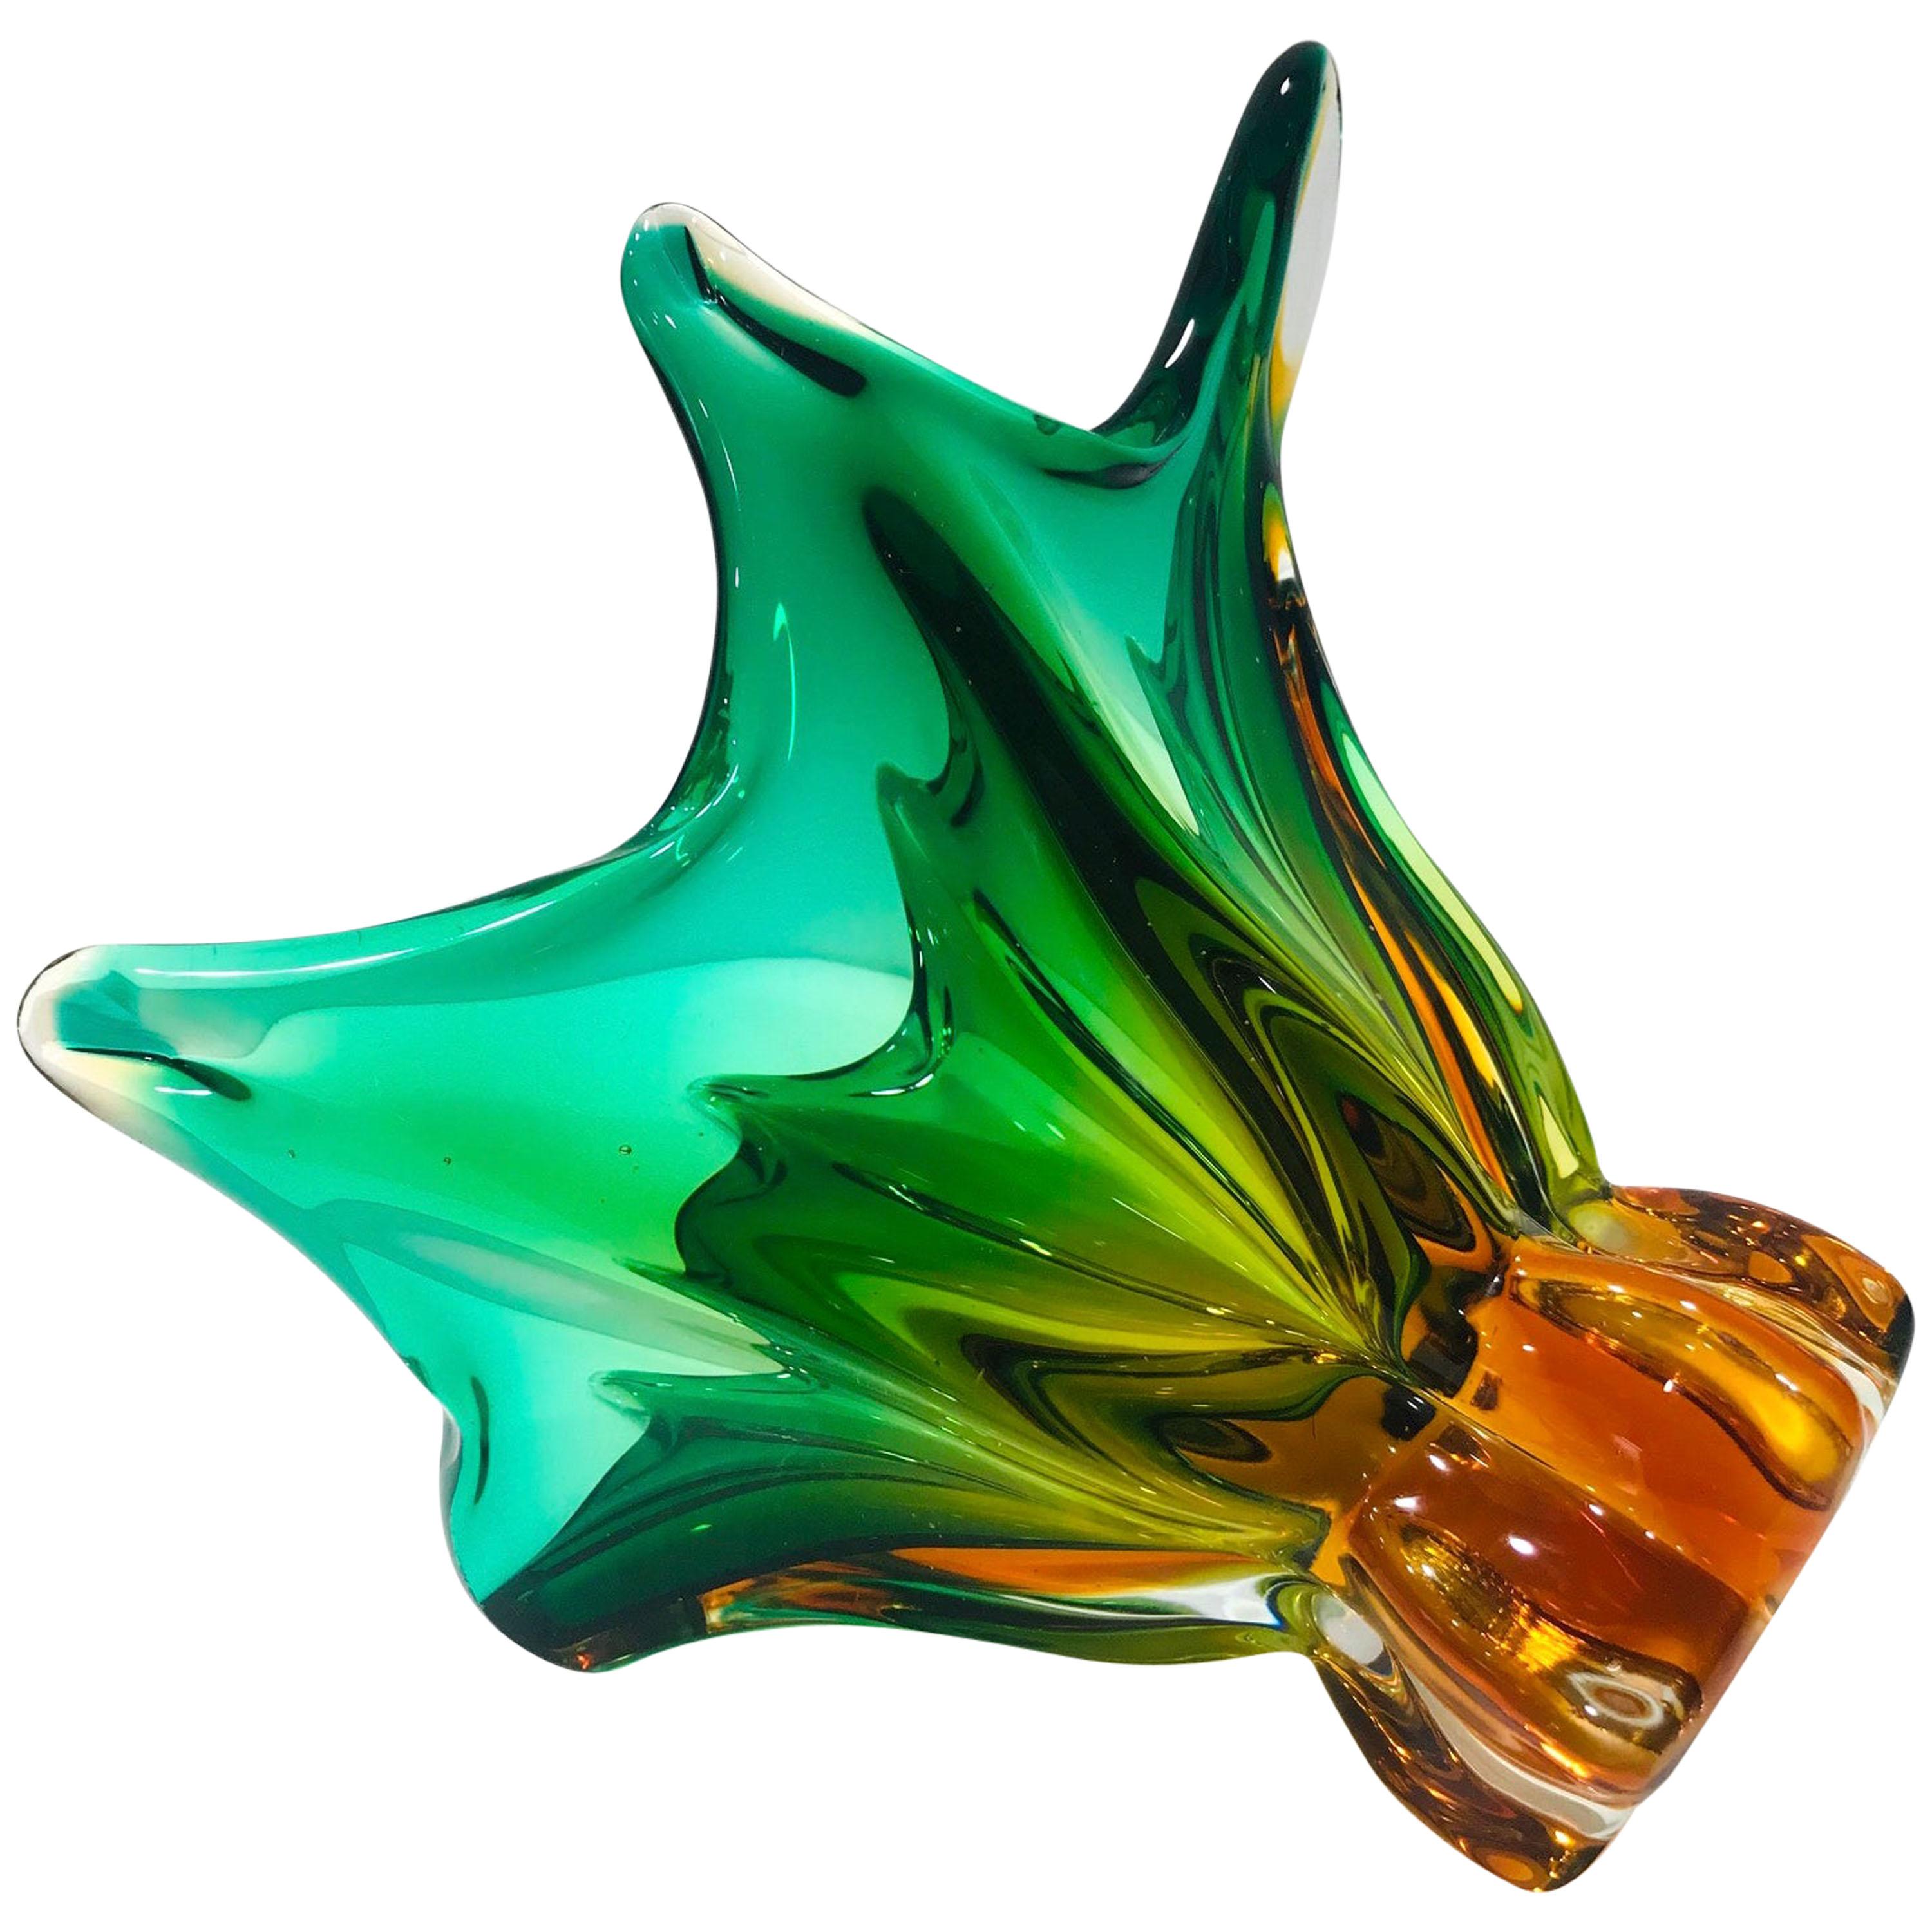 Mid-Century Modern Abstract Murano Glass Vase in Green and Gold, Italy c. 1950s